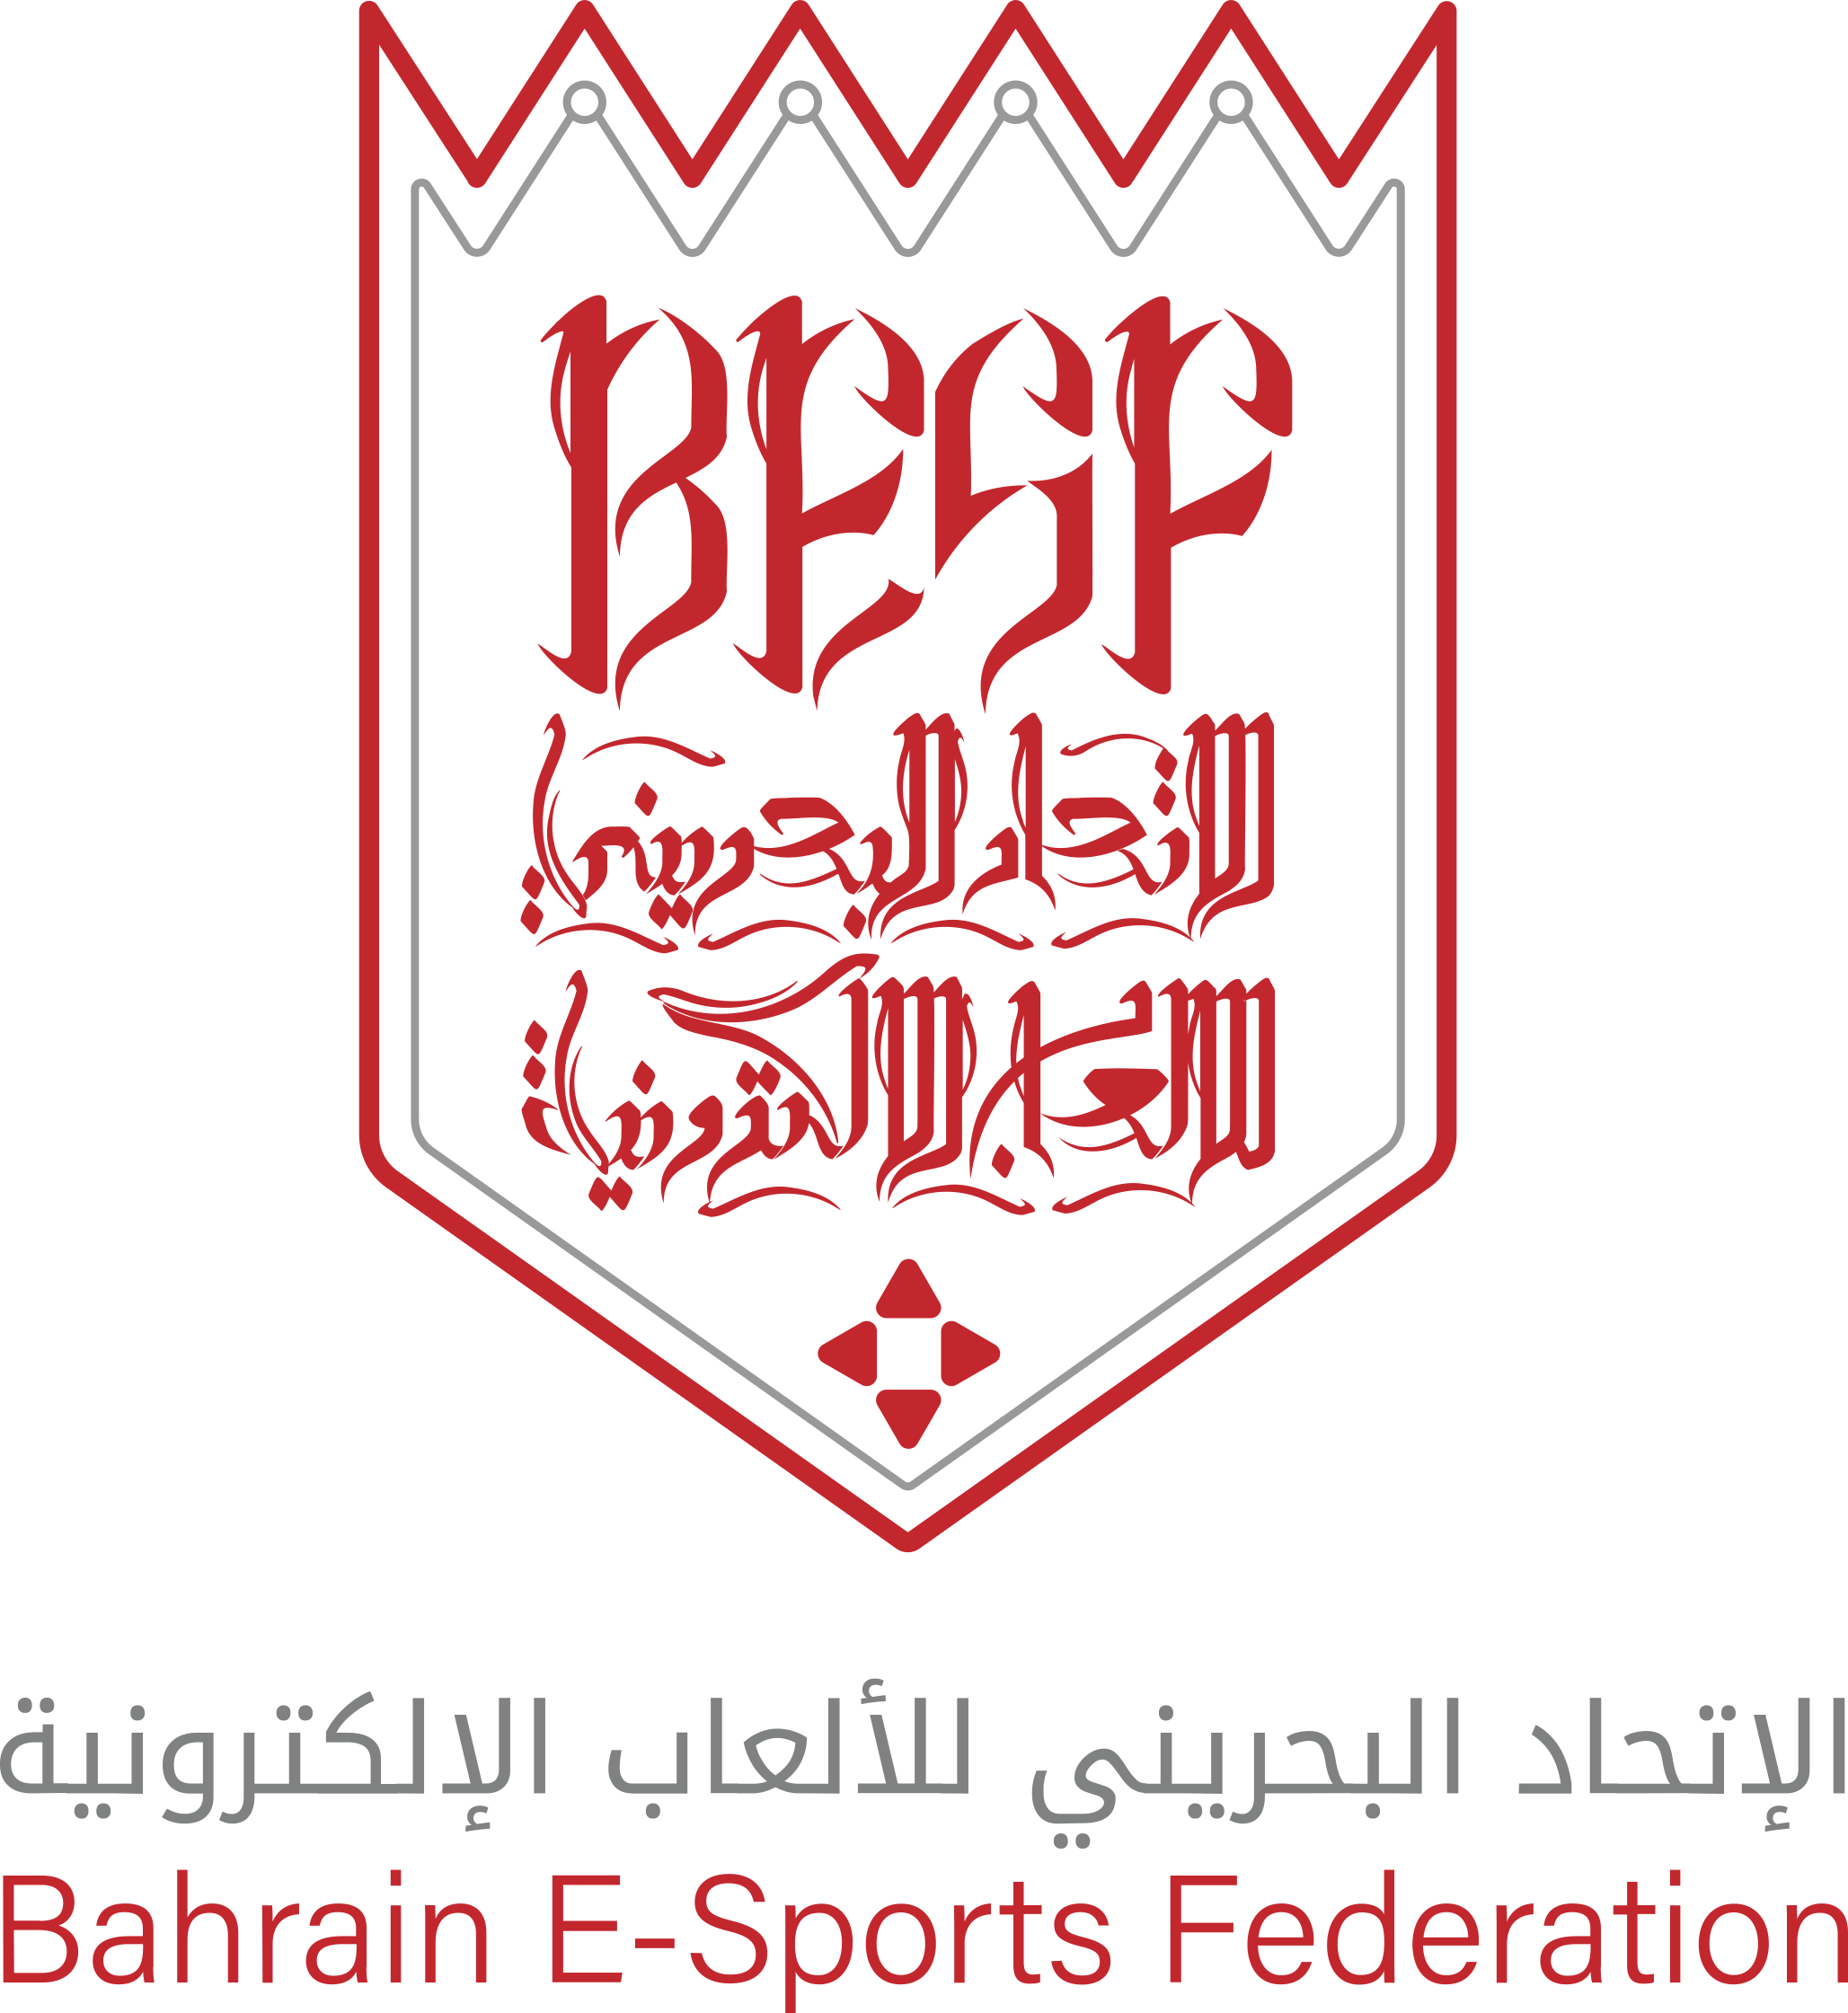 We have worked with Bahrain E-Sports Federation